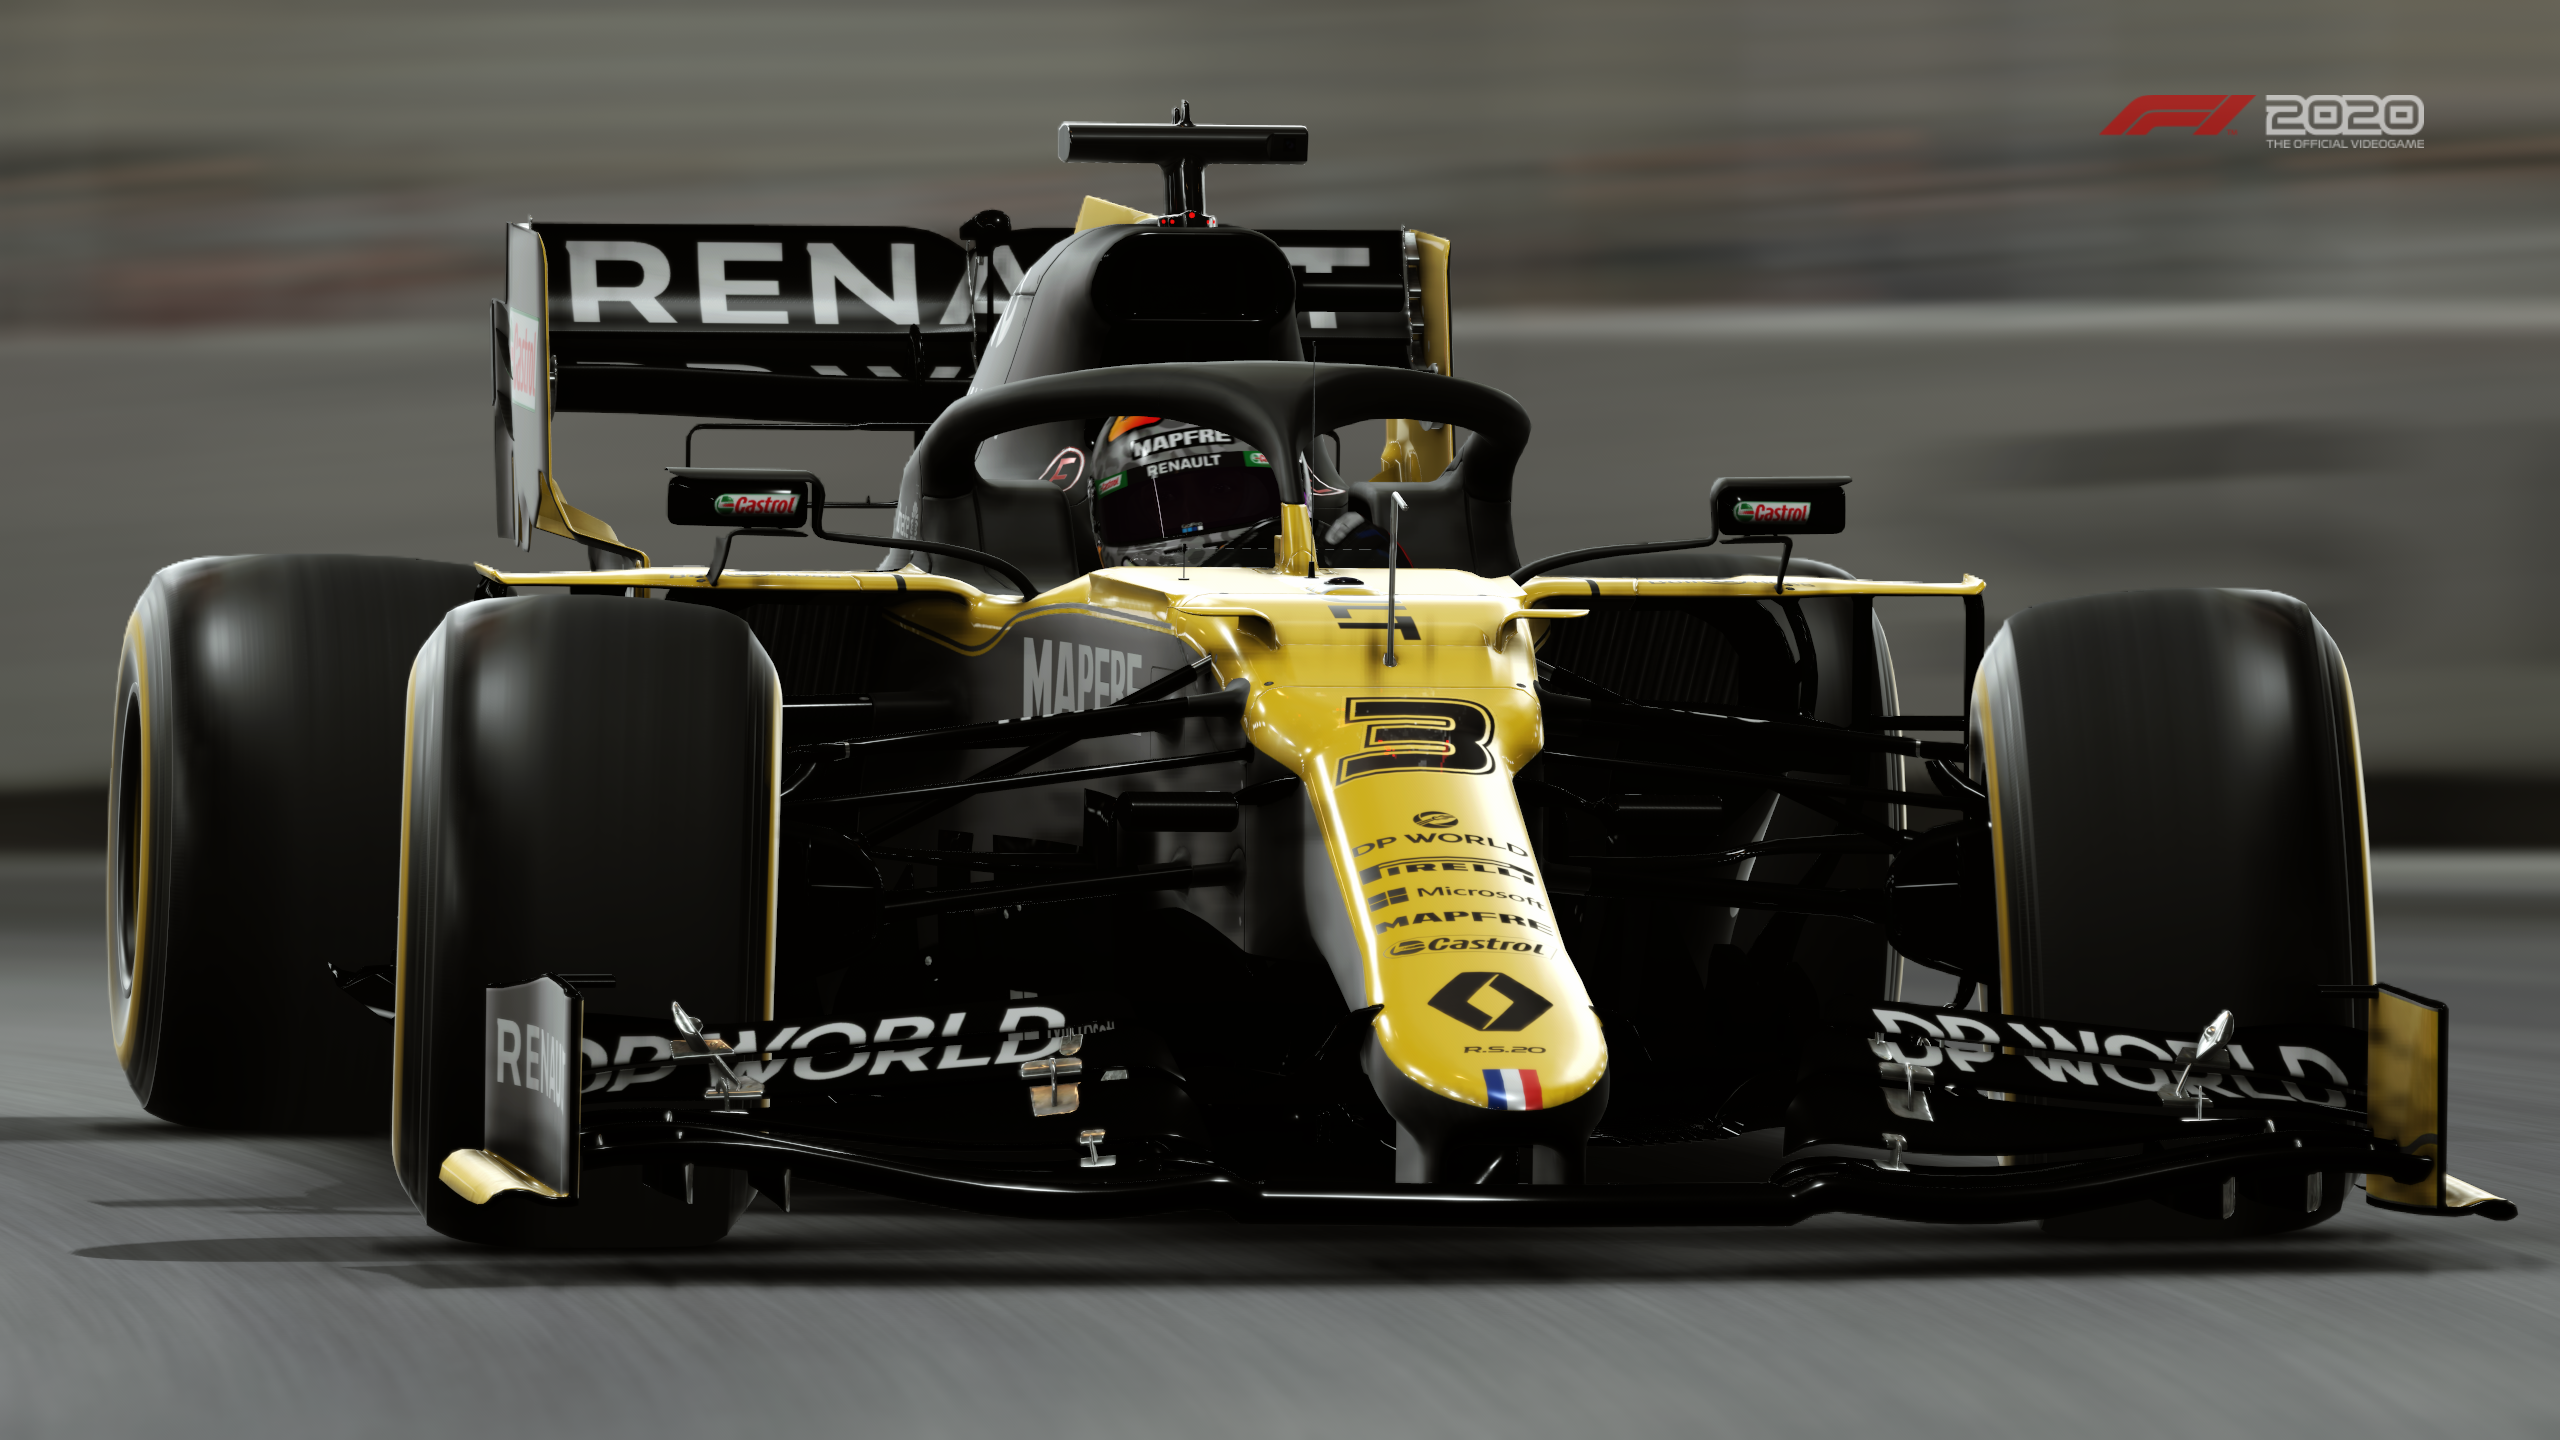 Renault F1 Wallpapers